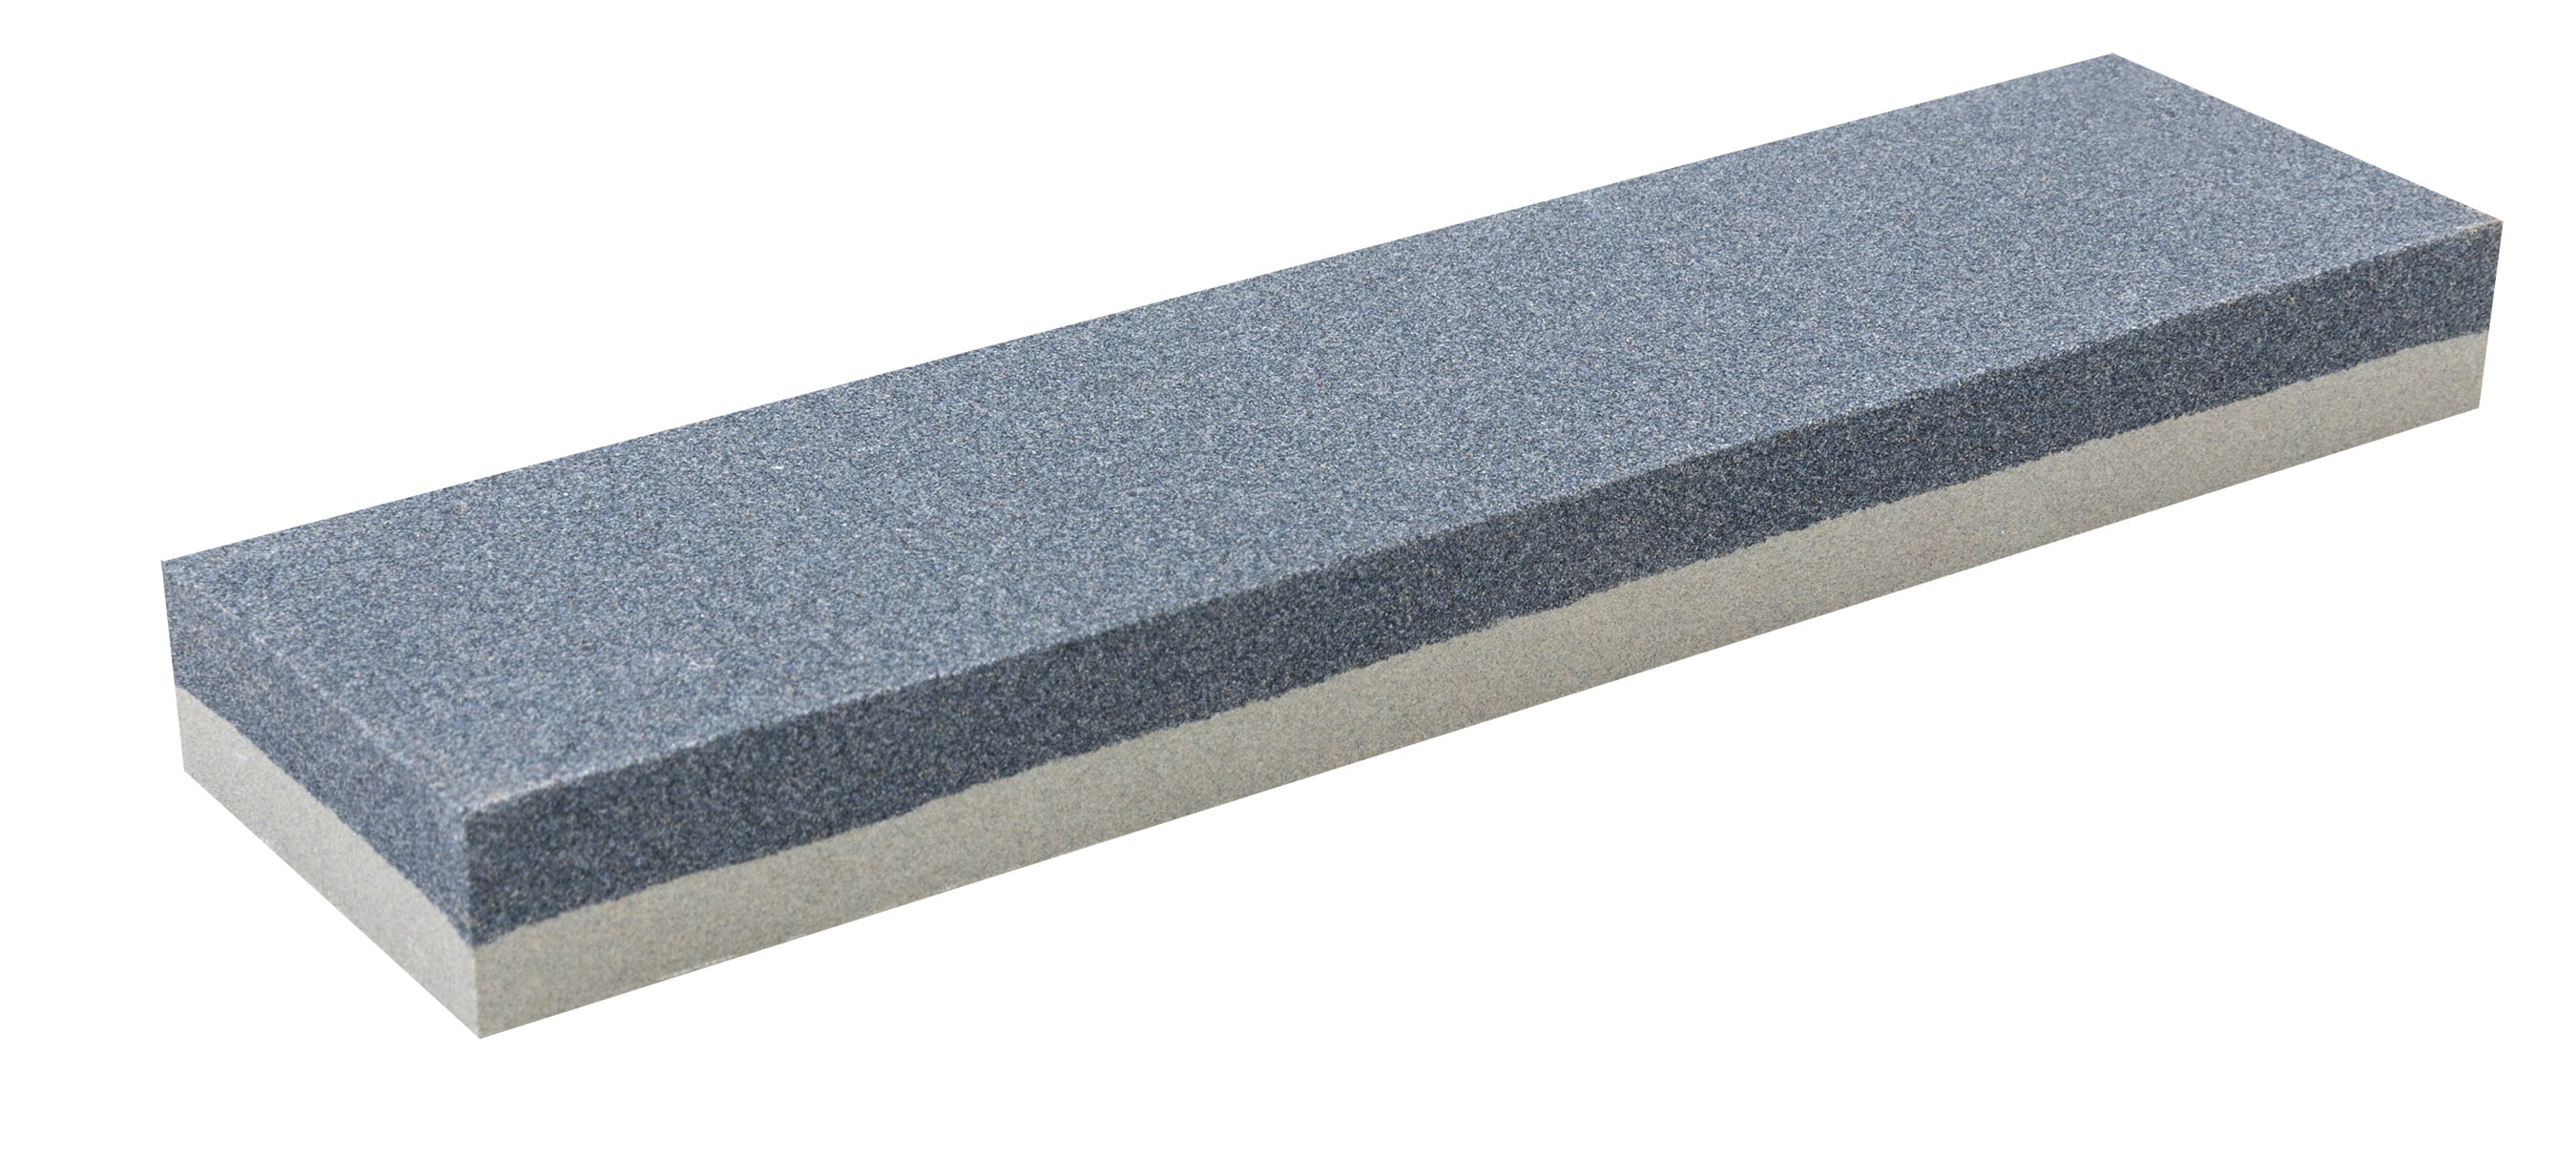 8Inch Sharpening Stone 300/1000 Grit Diamond Bench Stone with Clearance Channels 